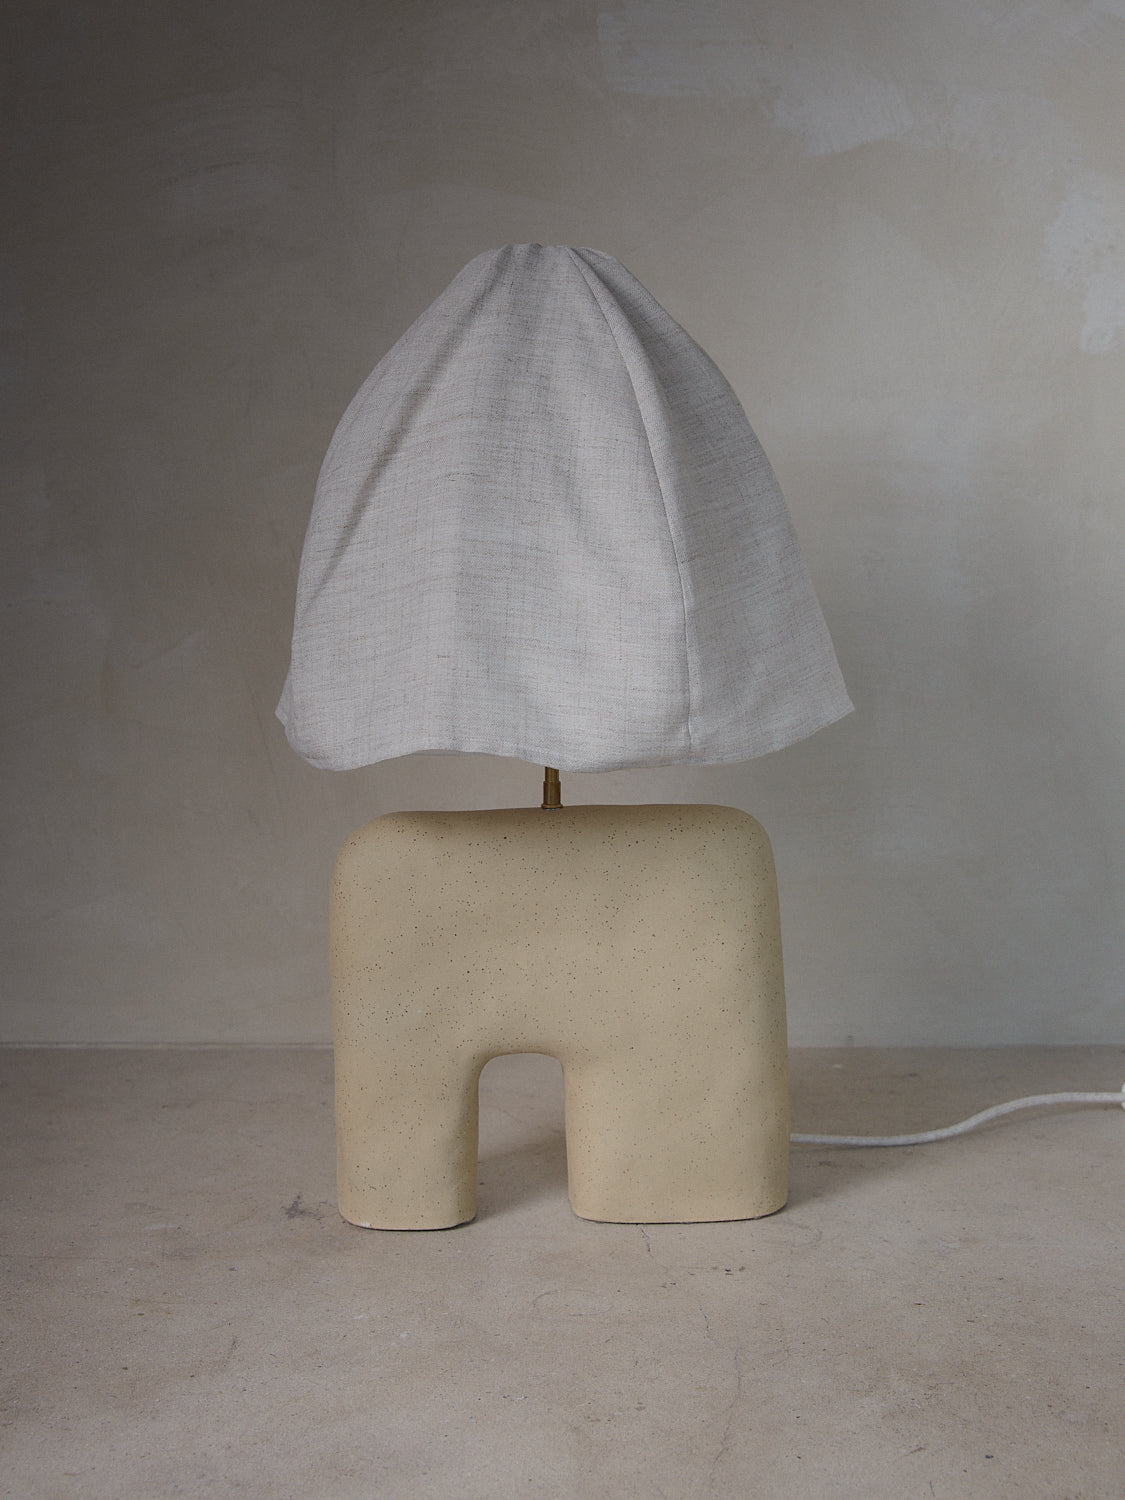 Handcrafted ceramic Aurore Lamp from Cuit Studio with linen shade.